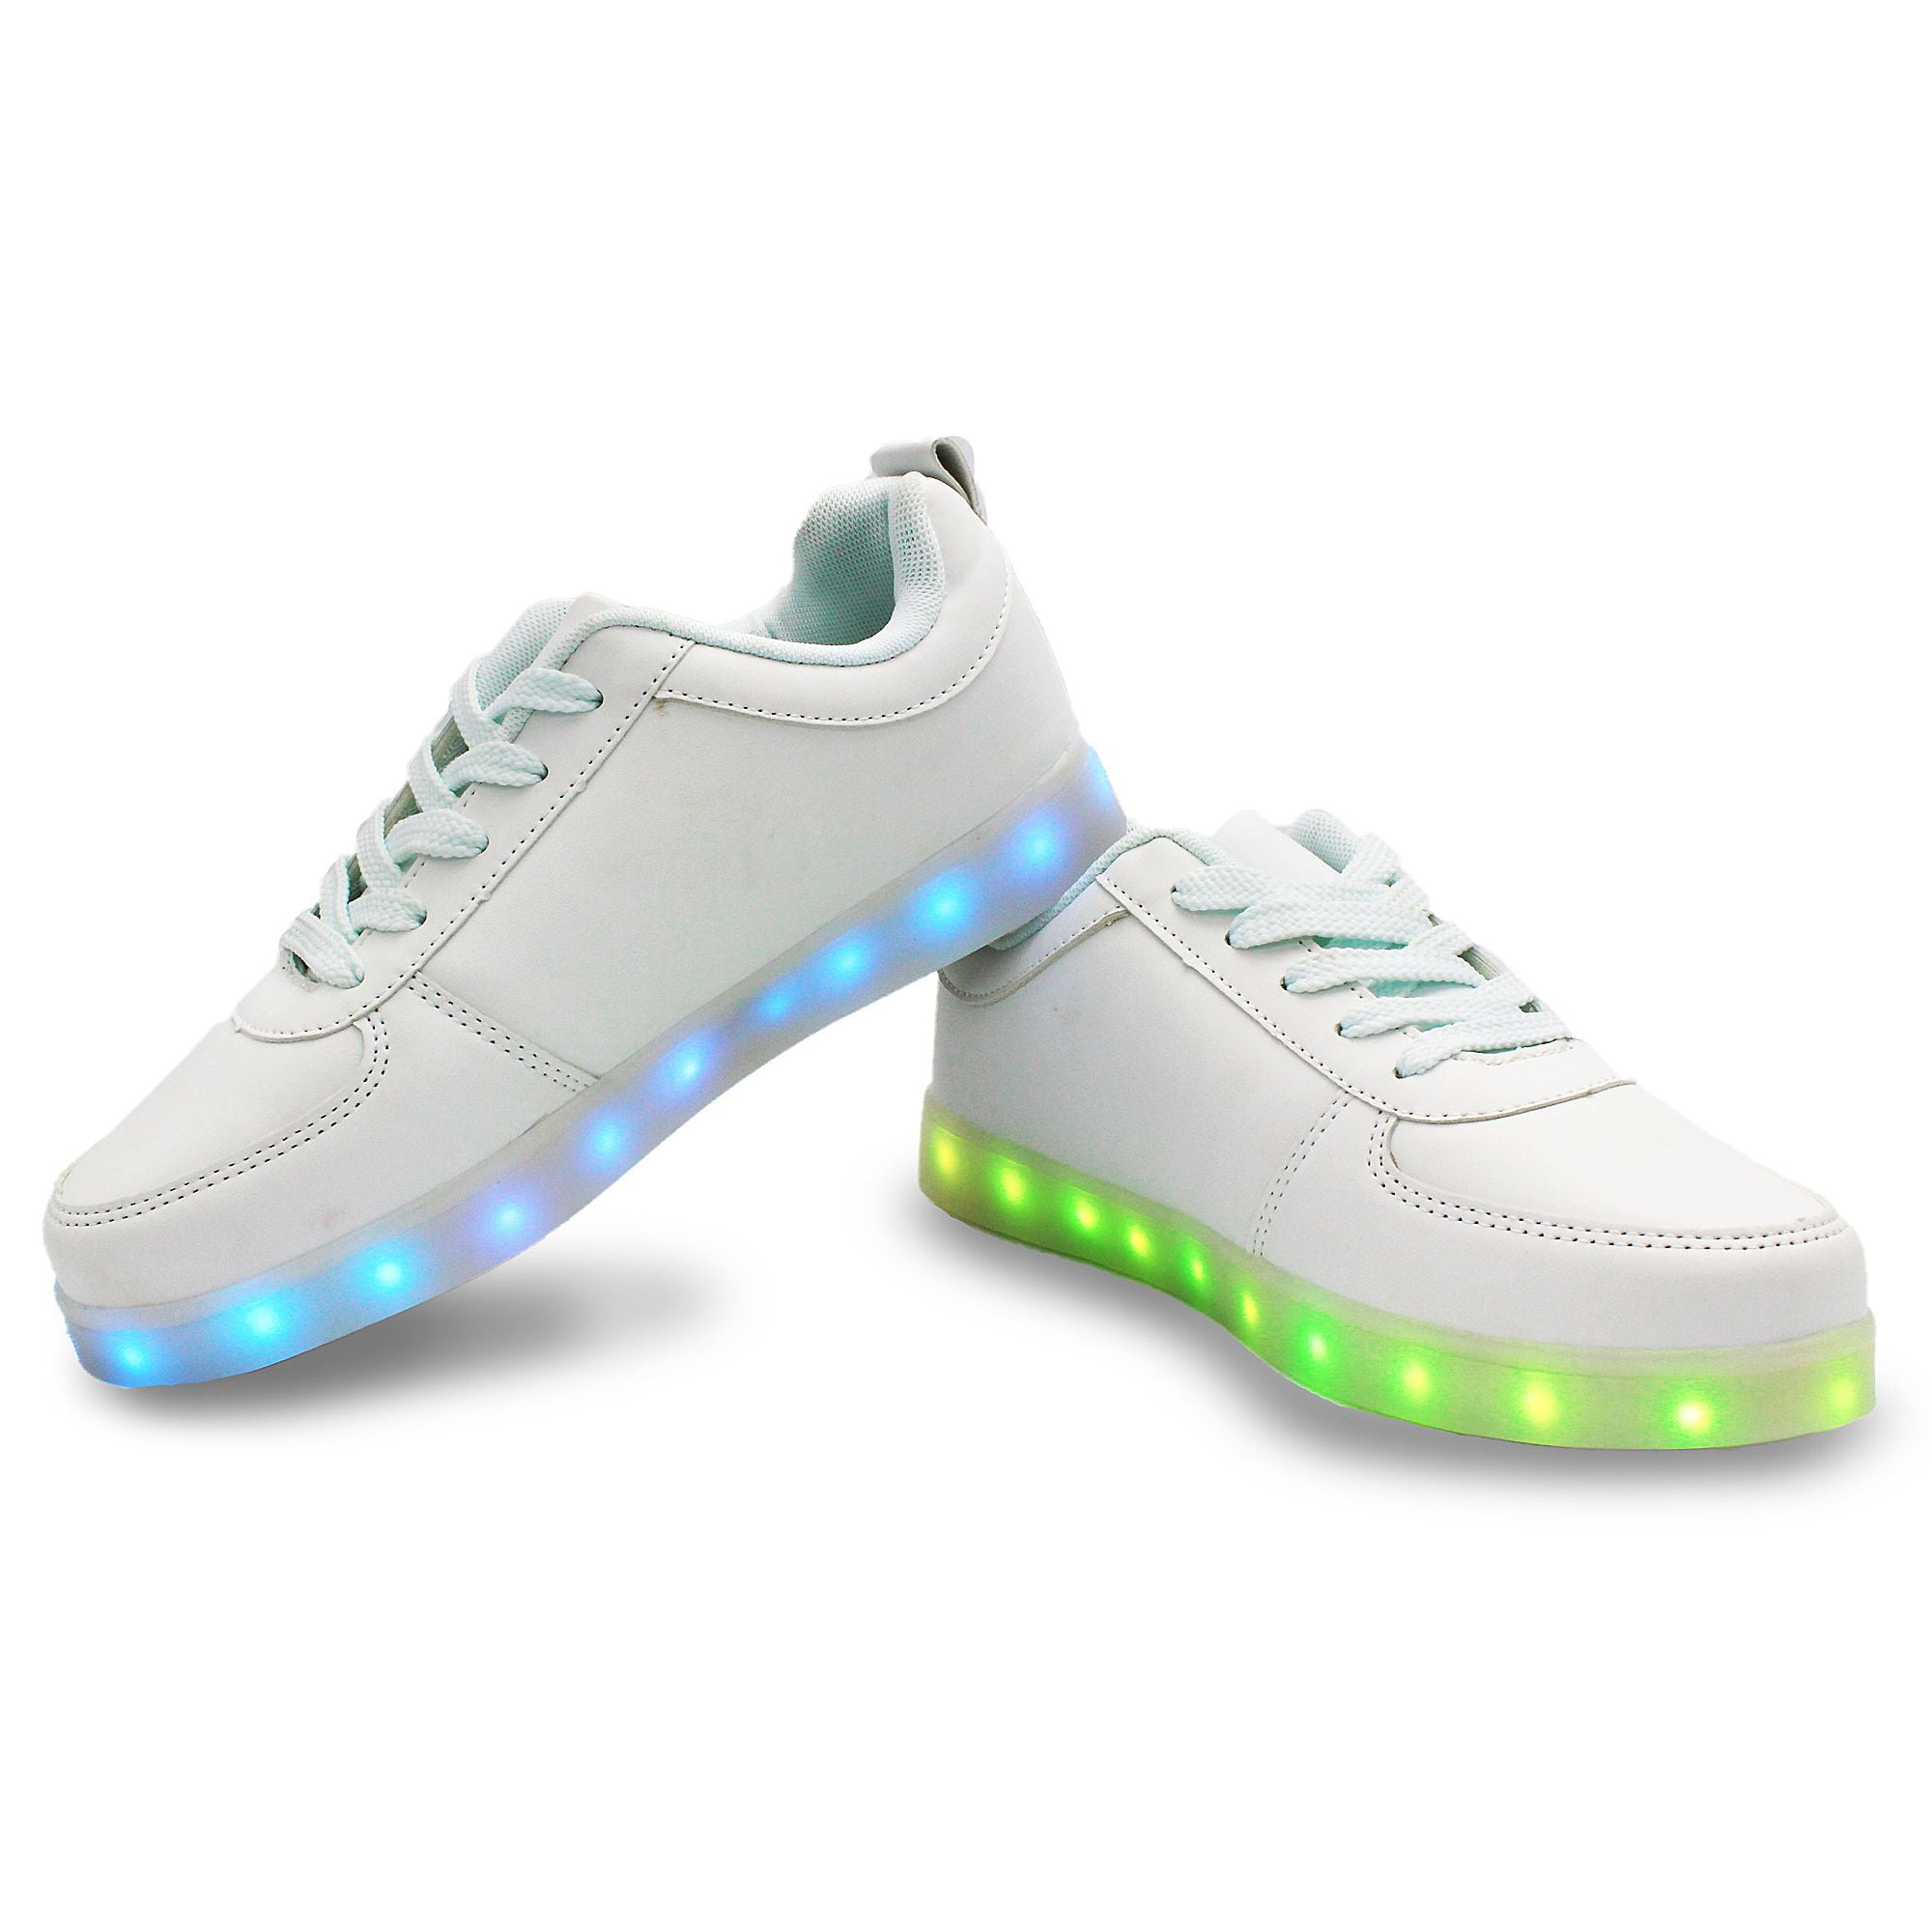 Family Smiles LED Light Up Sneakers Kids Low Top Girls Unisex Lace Shoes White Toddler US 10.5 / EU 27.5 -